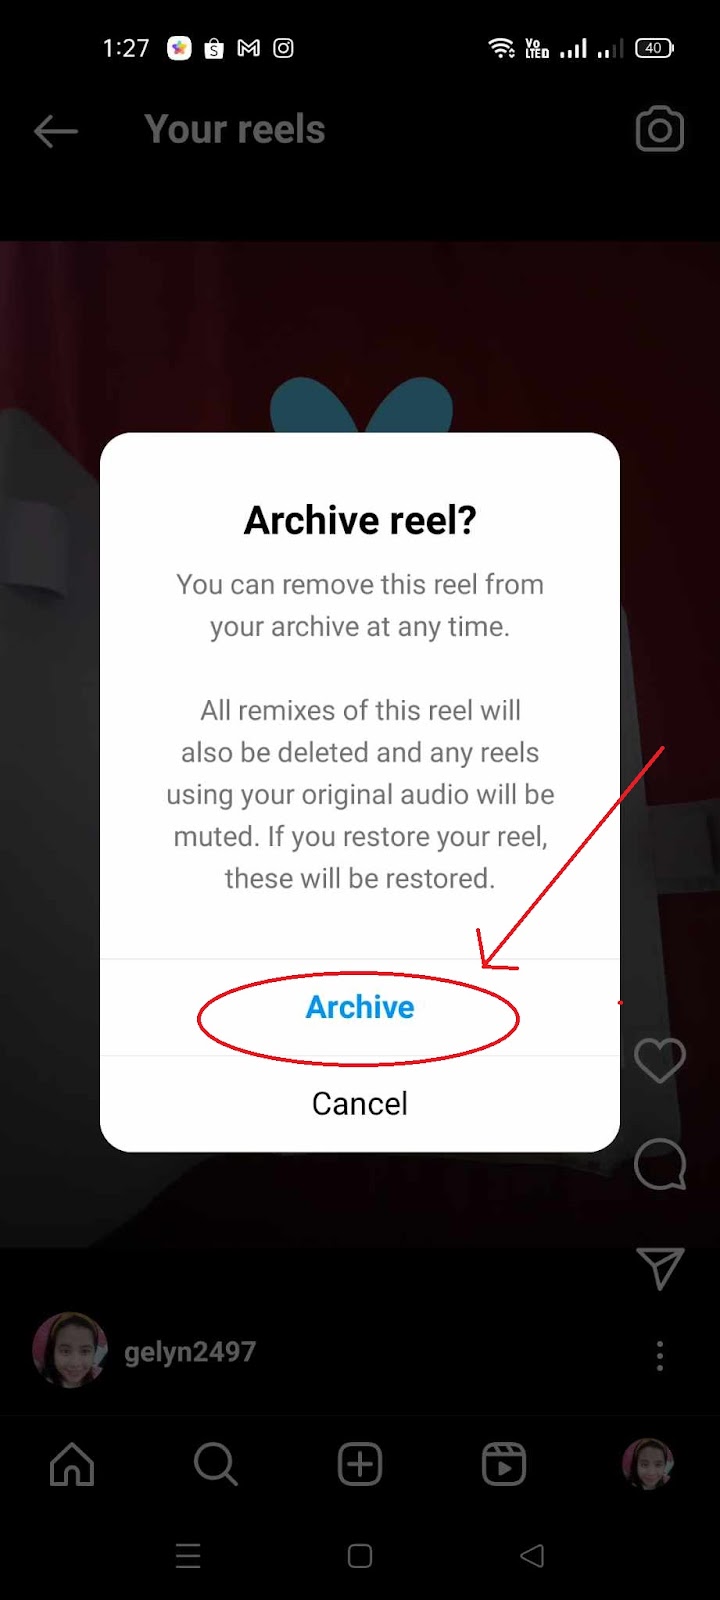 Archive Reels on Instagram - Confirm Archive